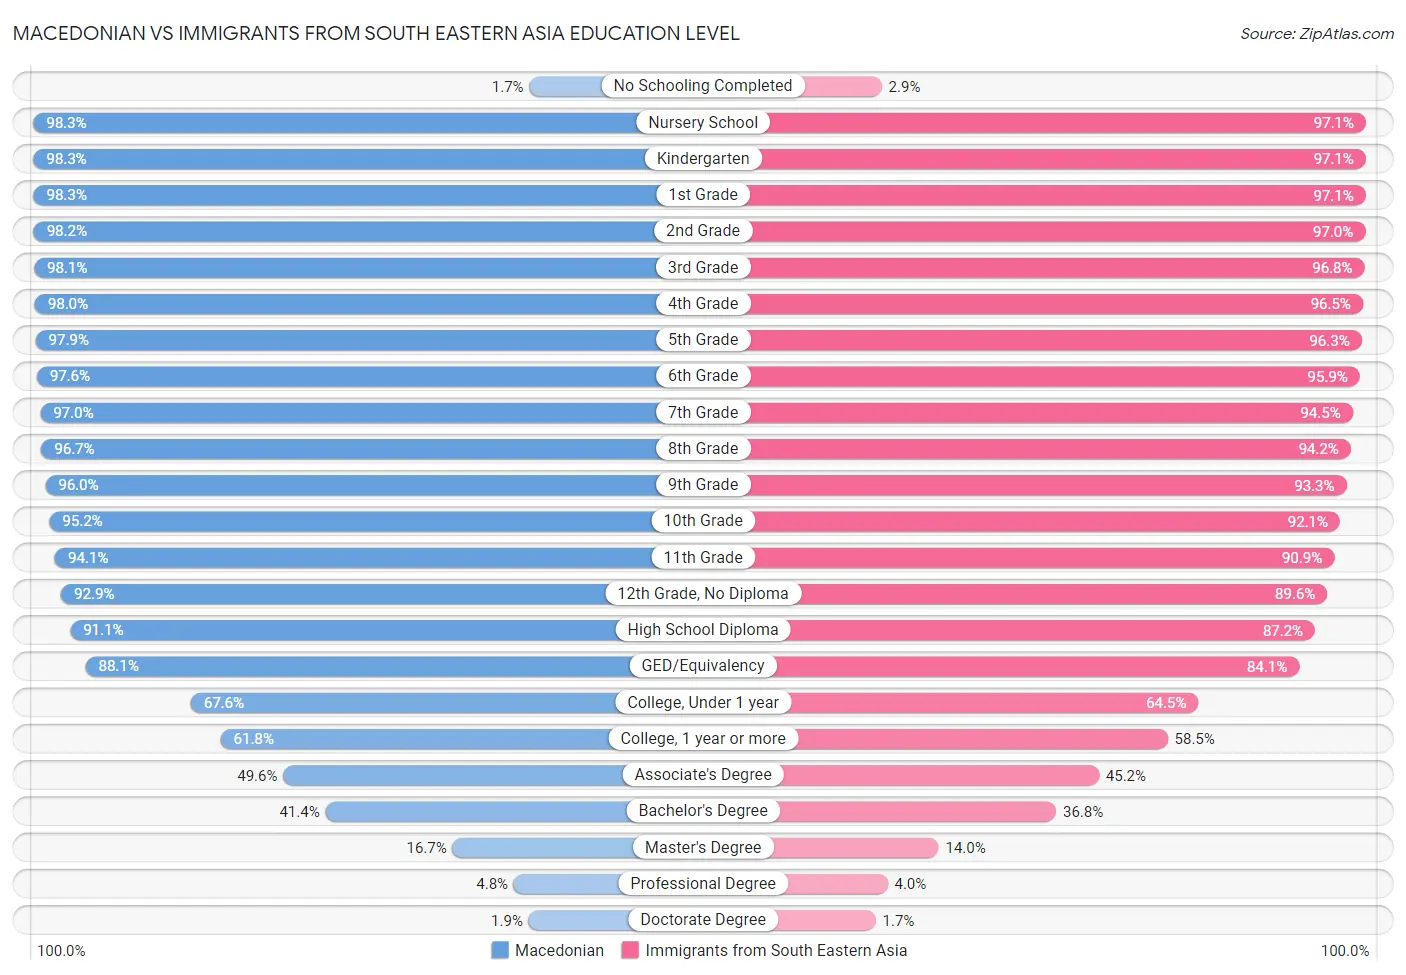 Macedonian vs Immigrants from South Eastern Asia Education Level